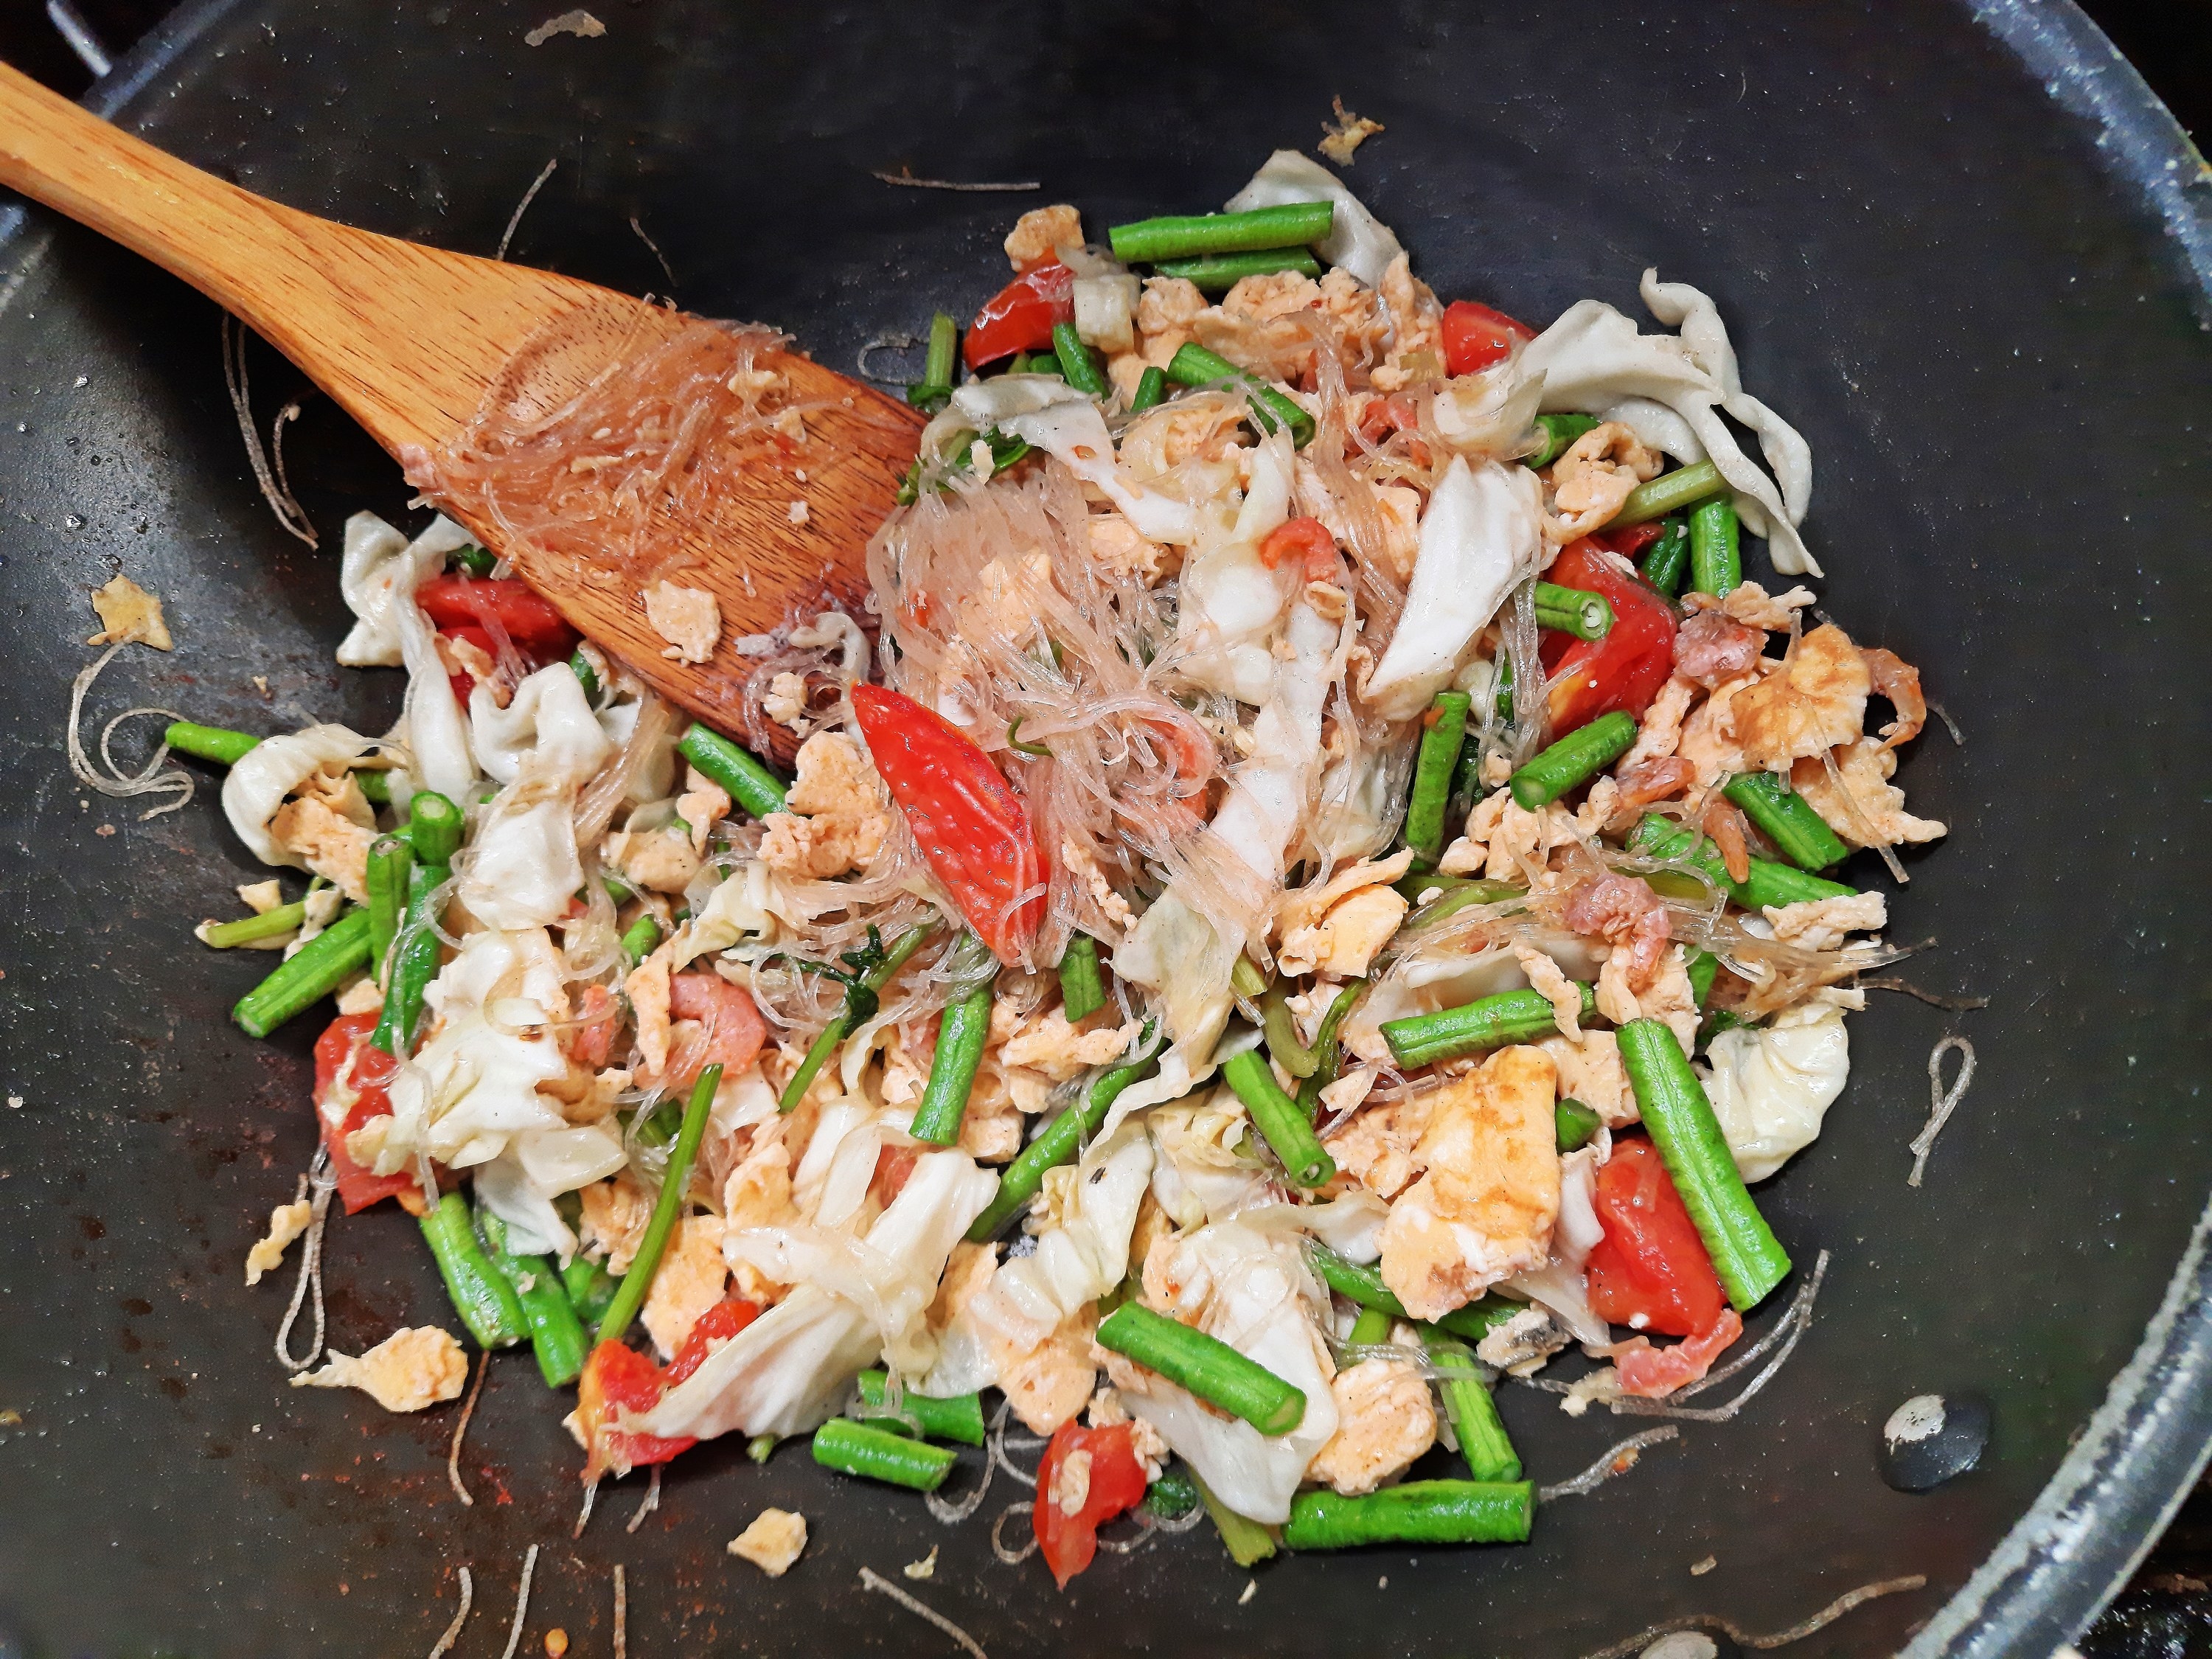 Stir fry being cooked